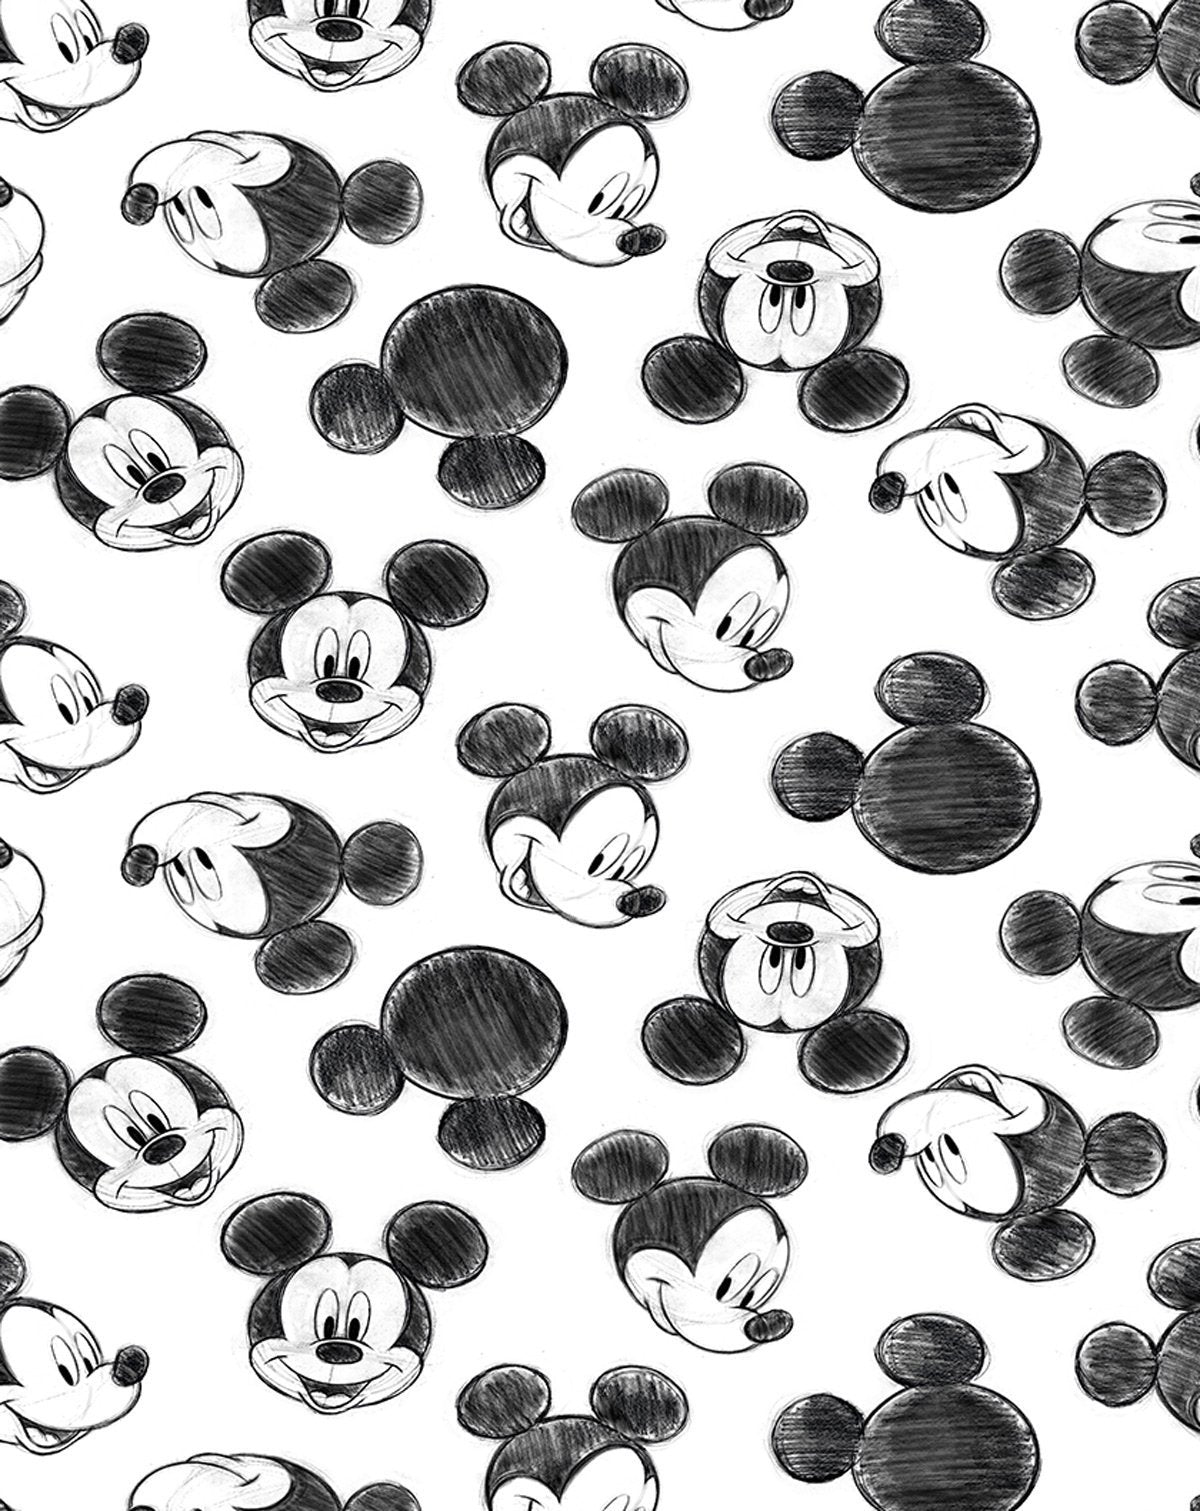 SHOP ¬©Disney Mickey Mouse Multiply Peel & Stick Removable Wallpaper